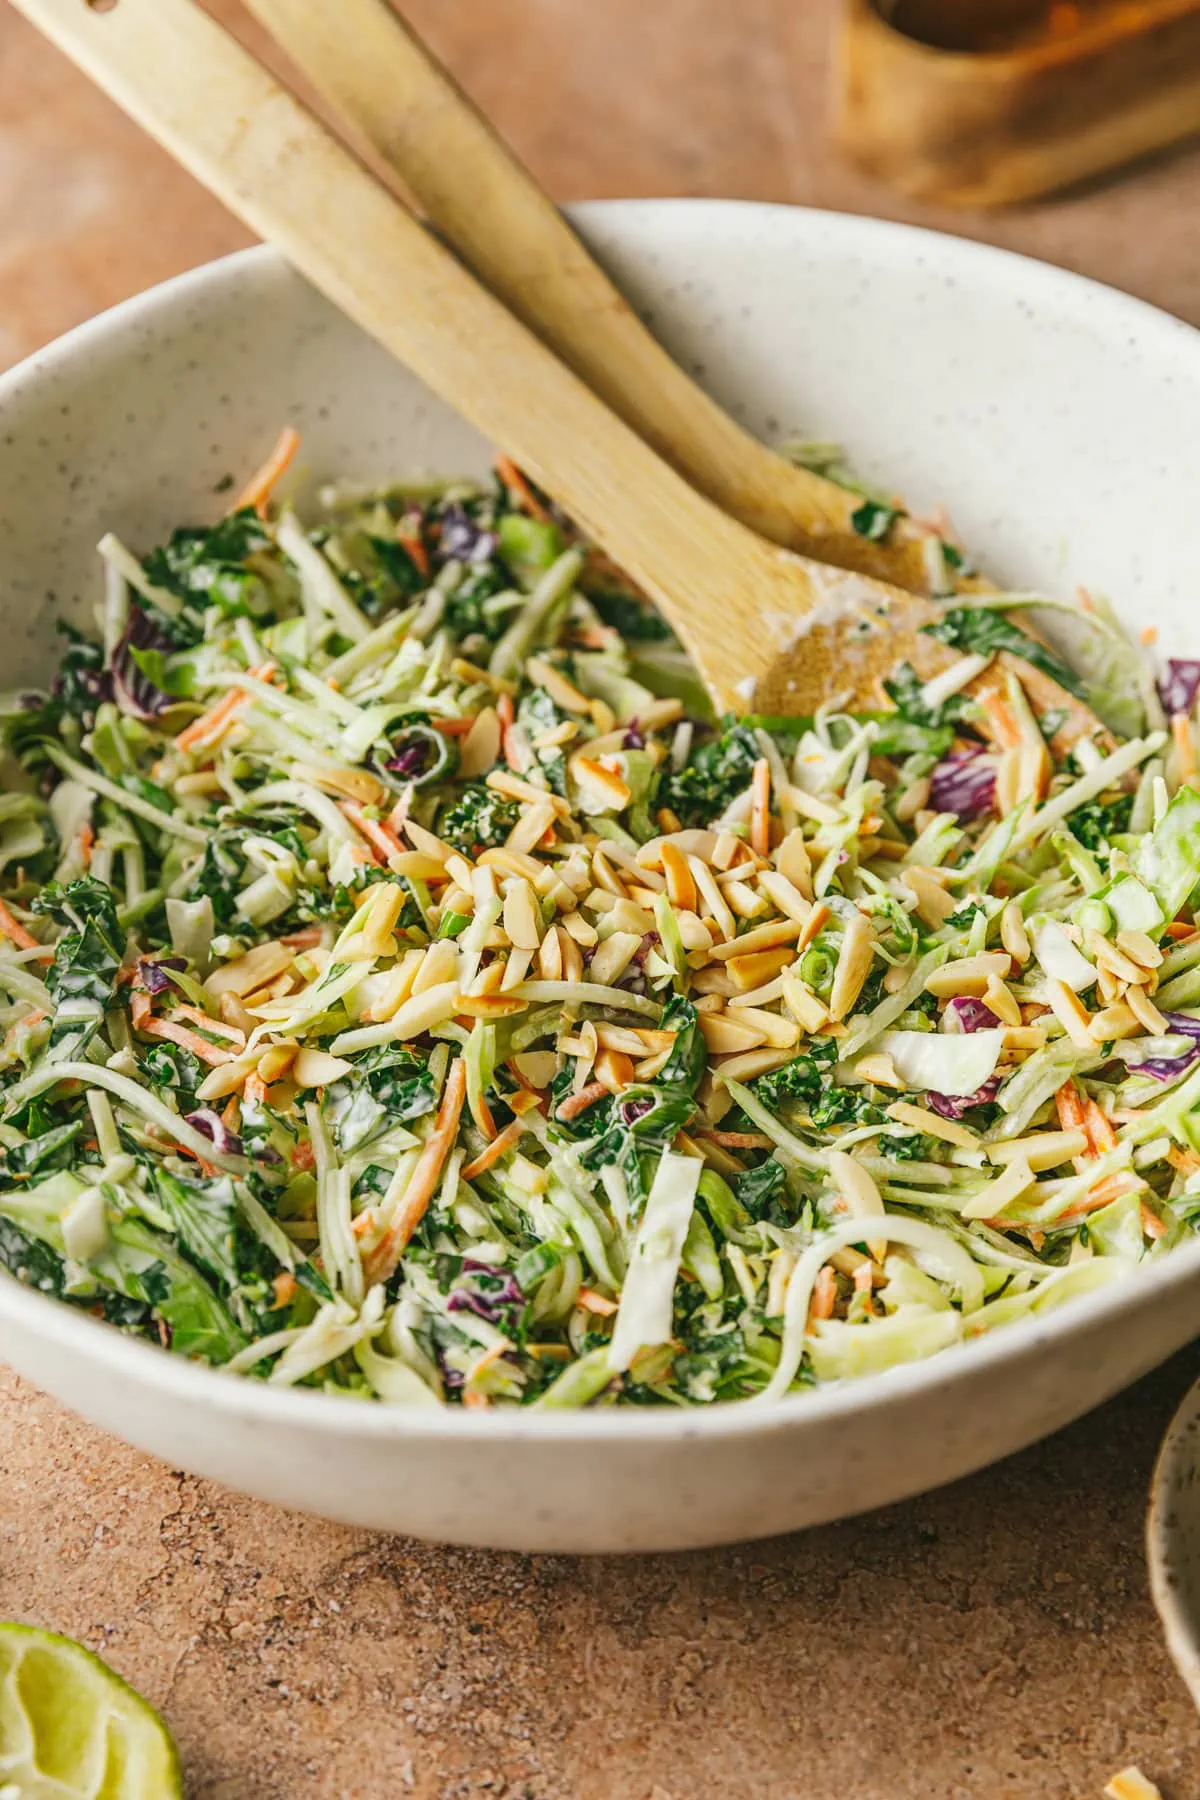 Citrus slaw in a white bowl with wooden spoons.